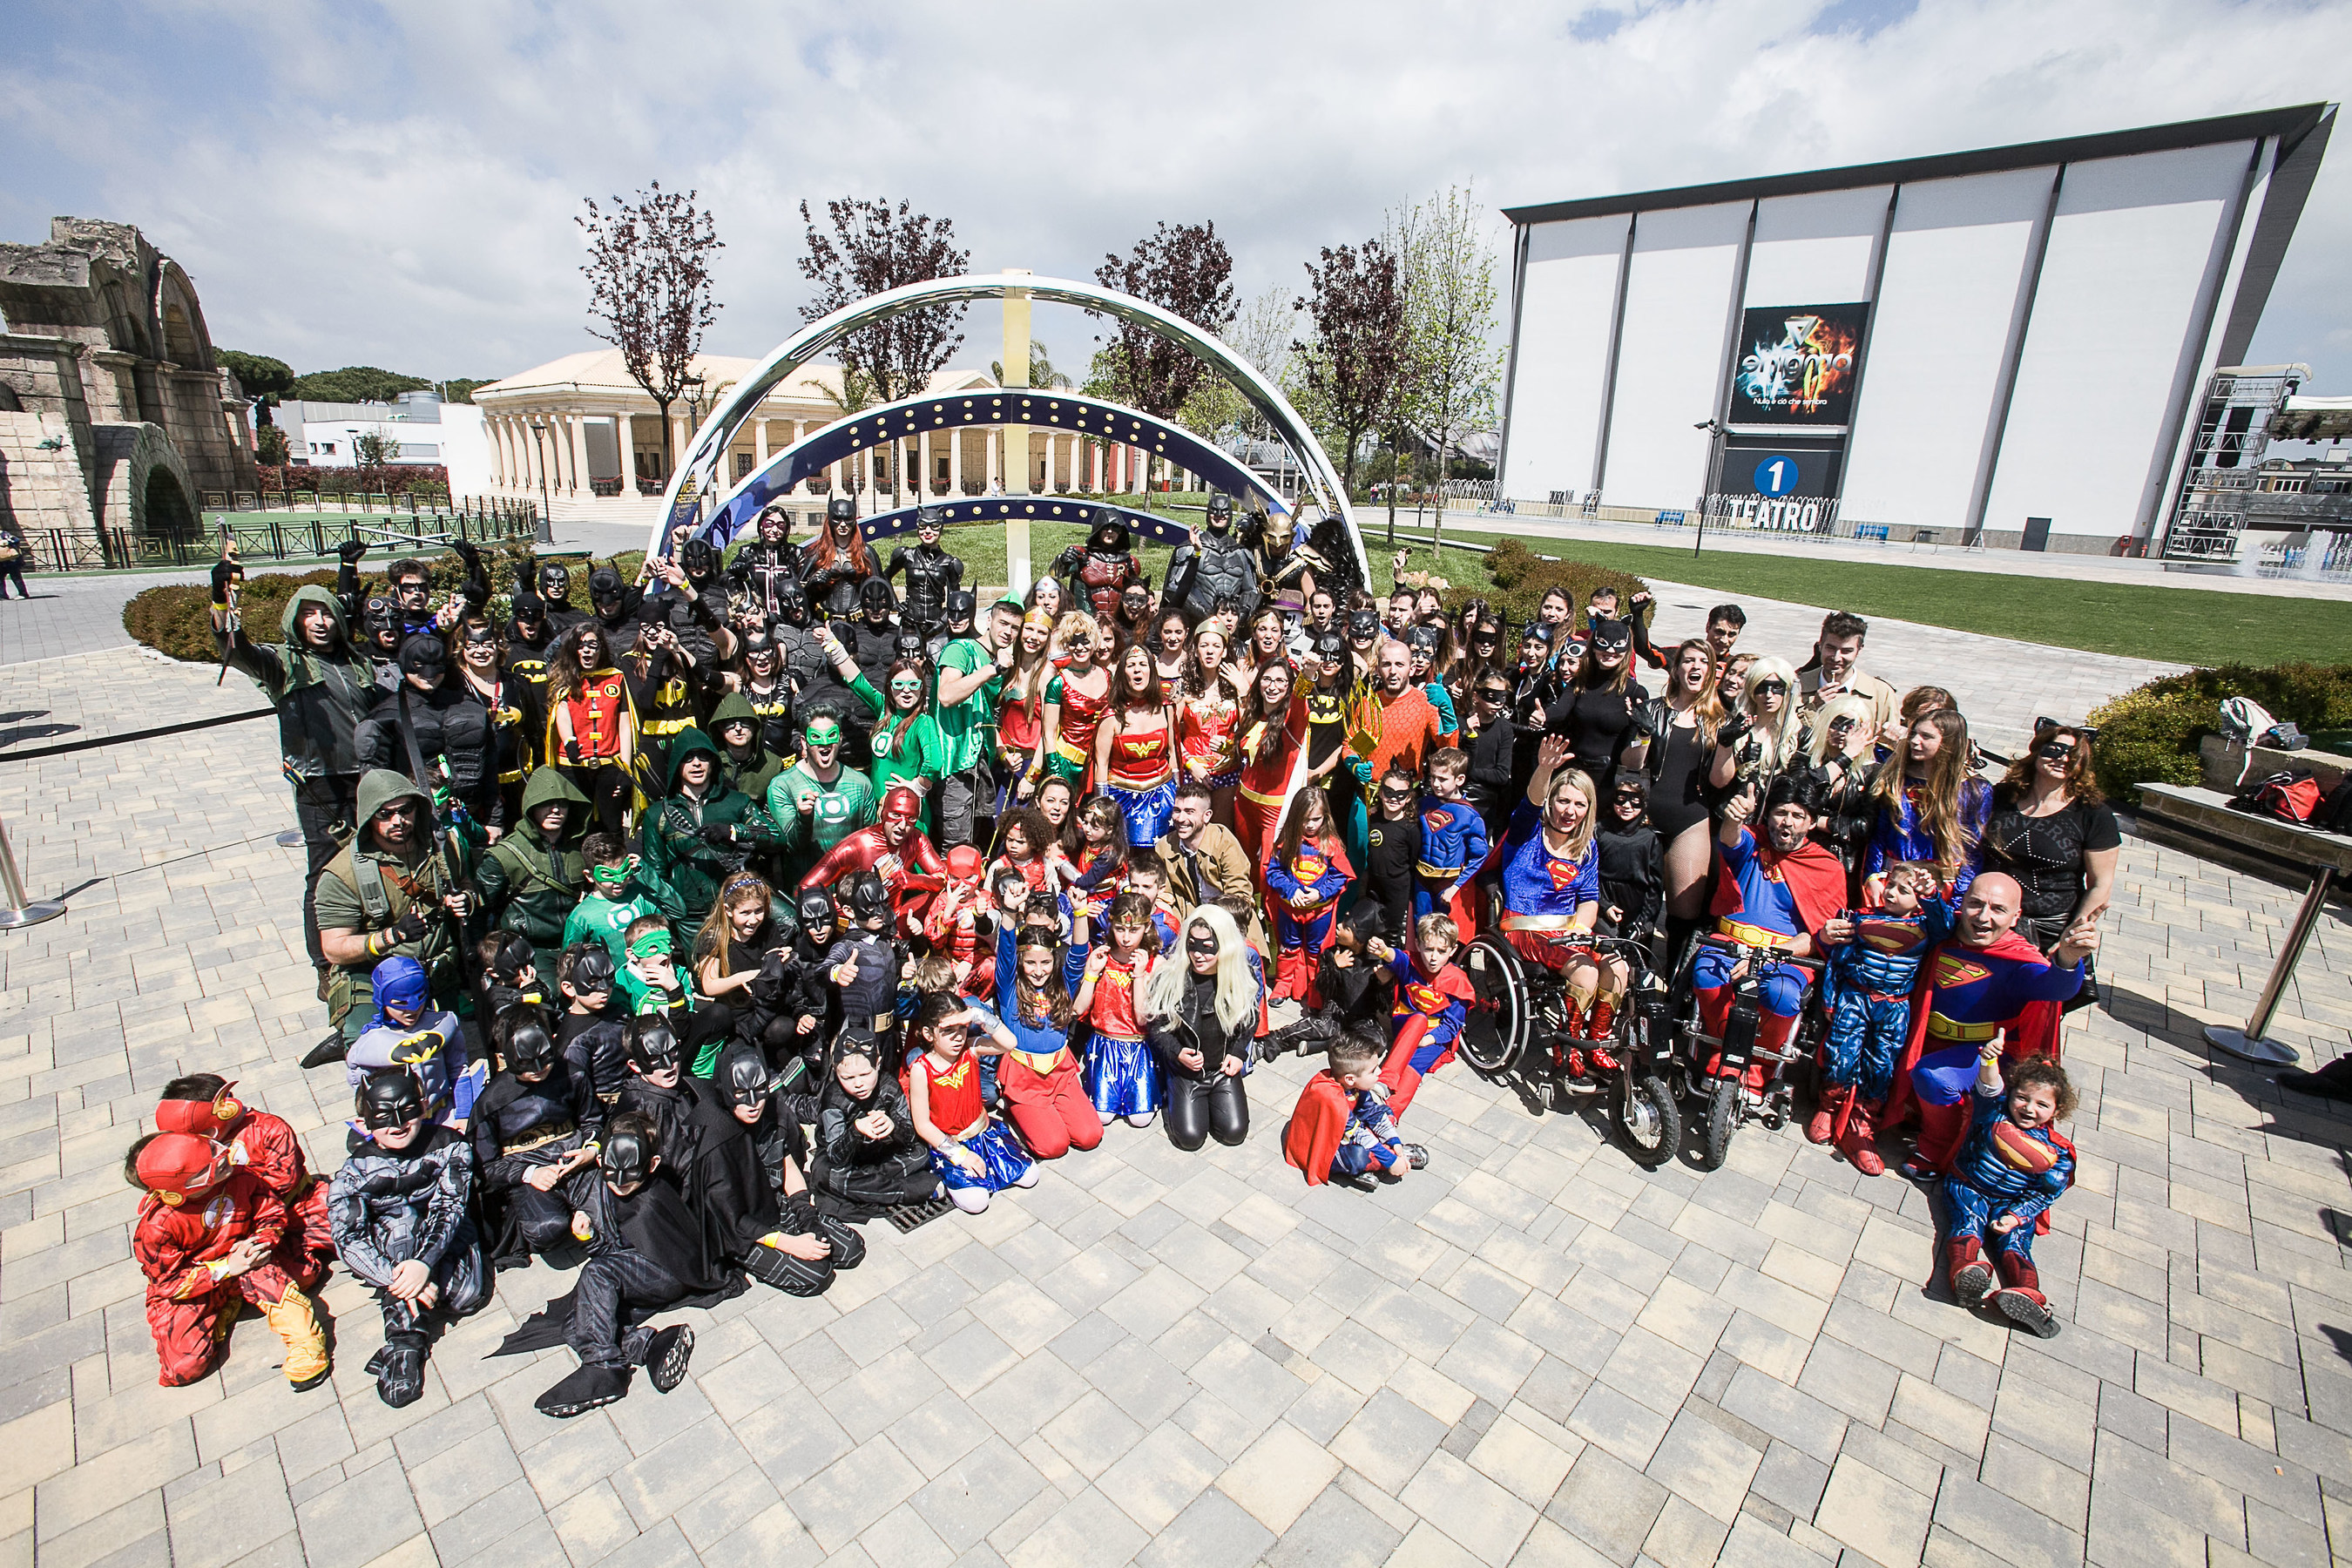 Fans dressed as DC Comics Super Heroes gather to set the Guinness World Record for most people dressed as DC Comics Super Heroes within a 24-hour period at the DC Comics Super Hero World Record Event on April 18, 2015 in Rome, Italy.